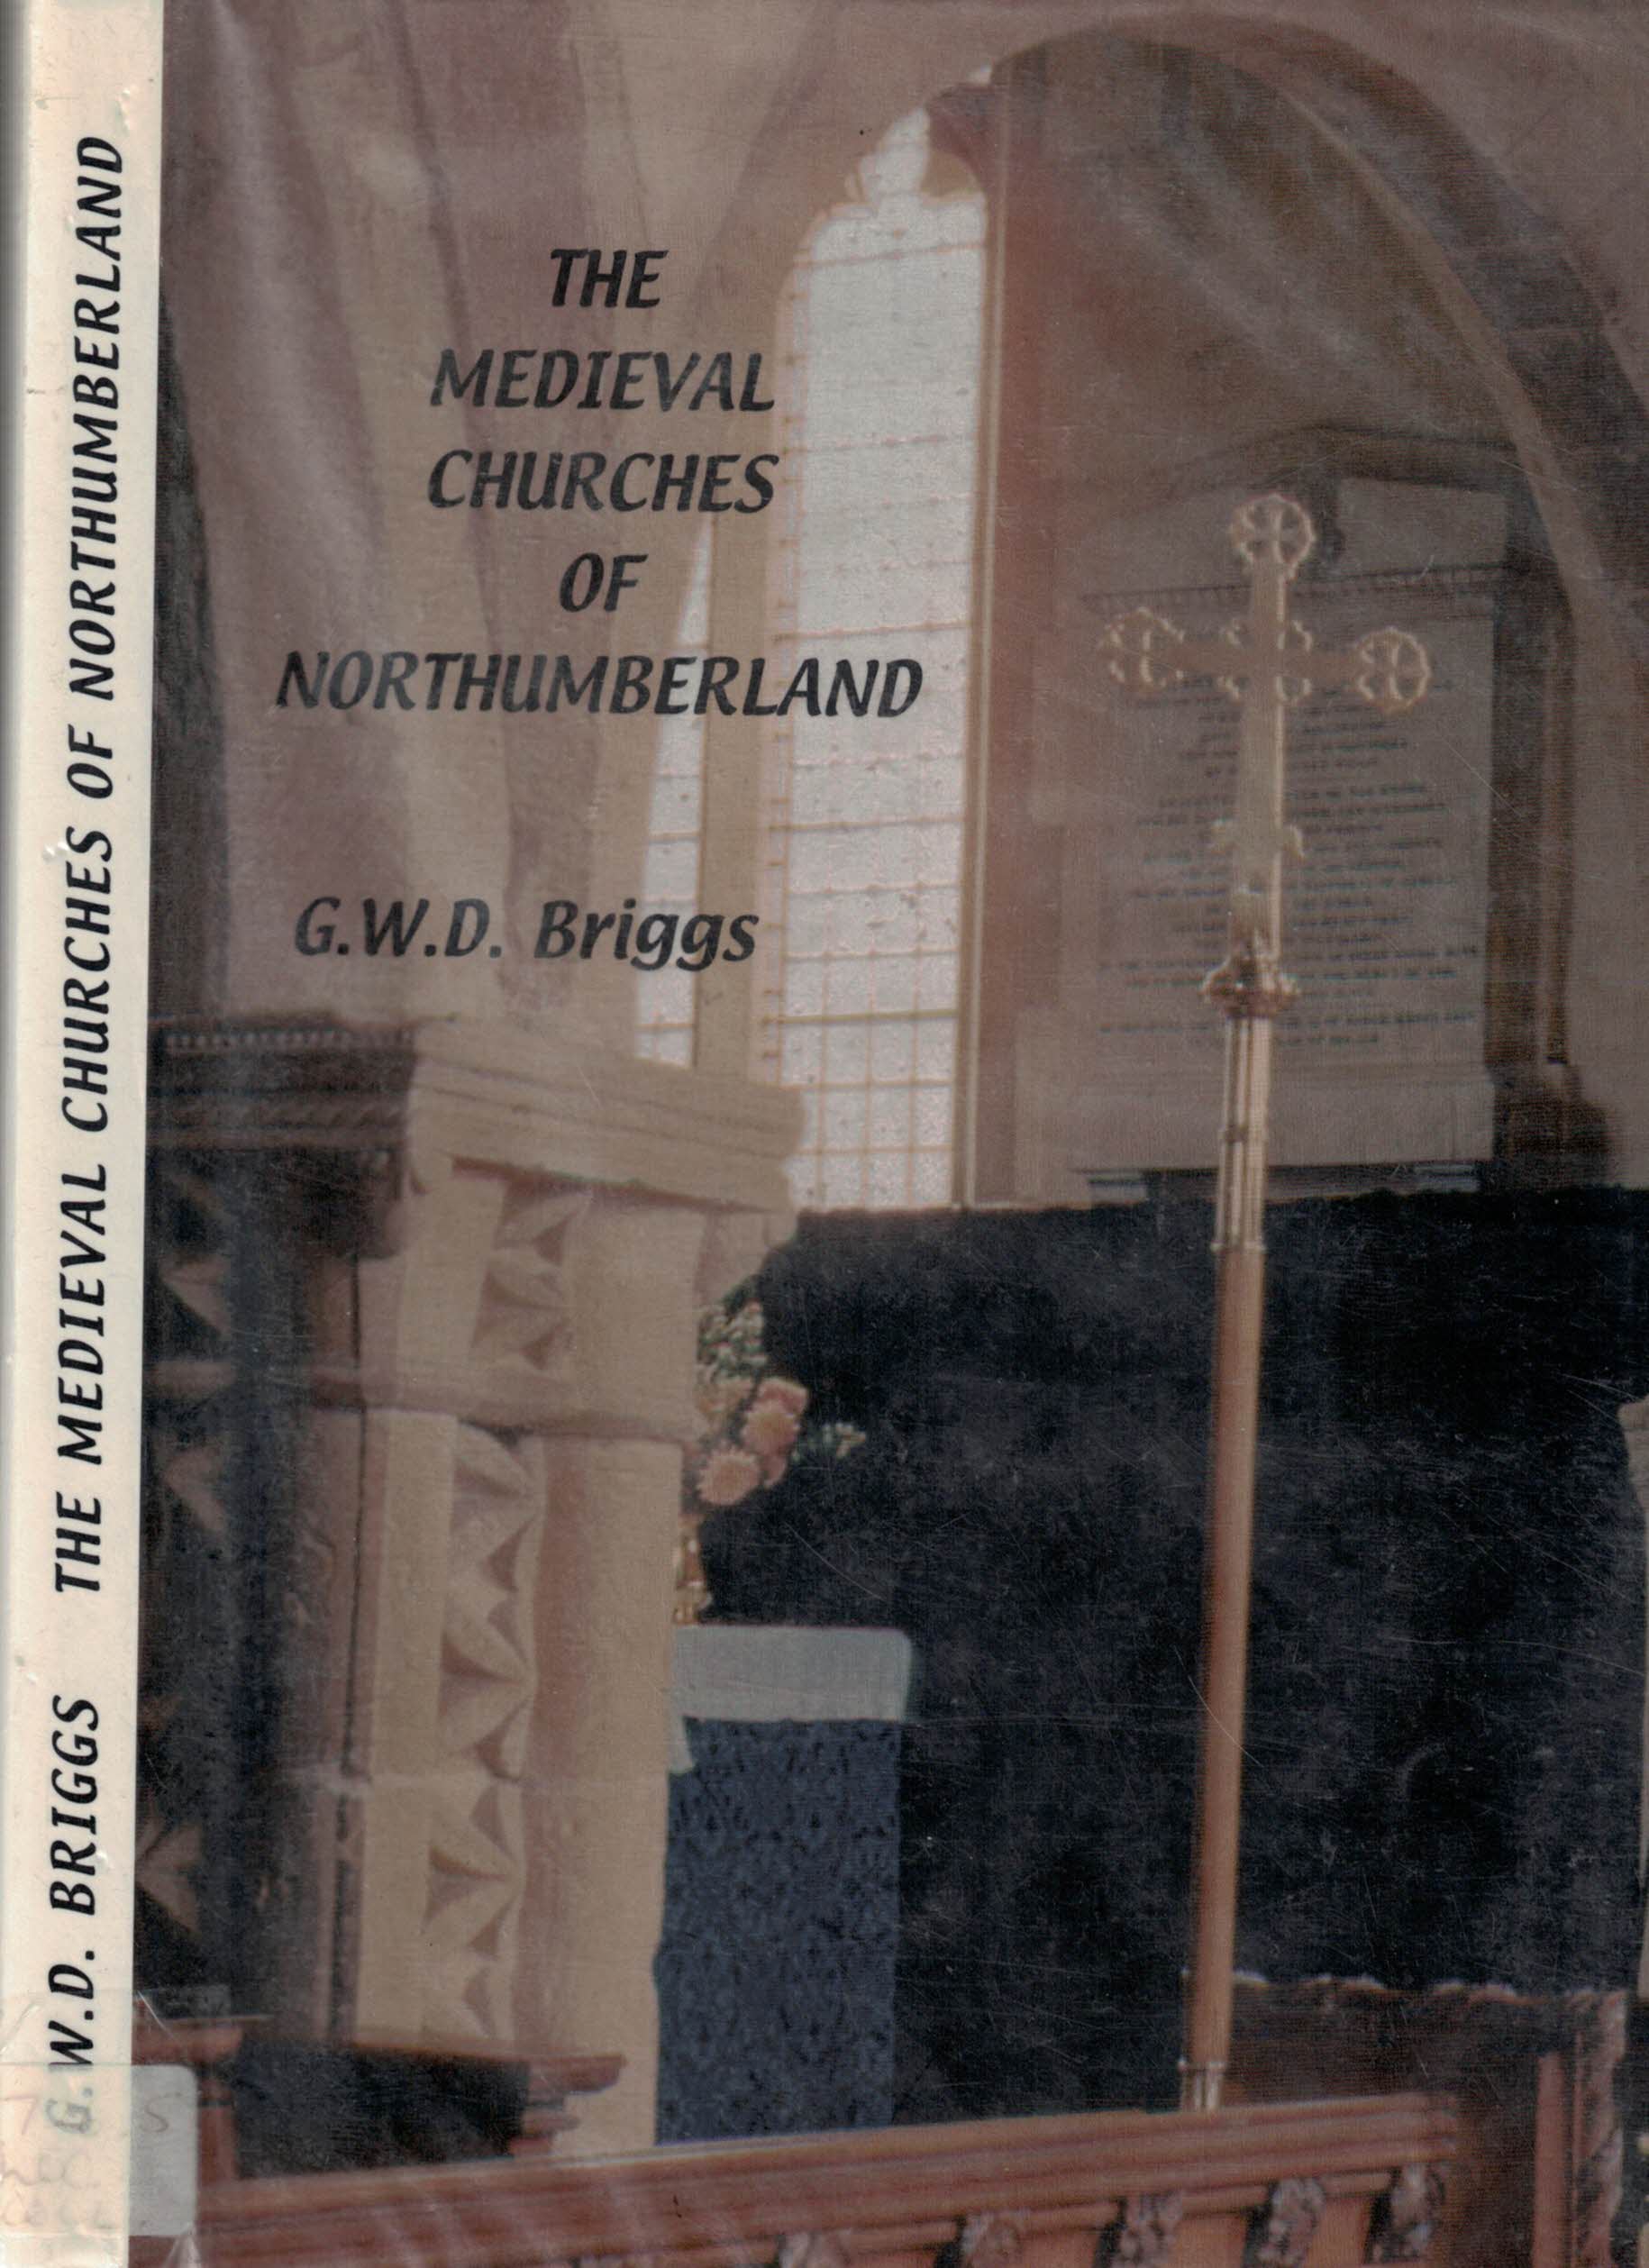 The Medieval Churches of Northumberland